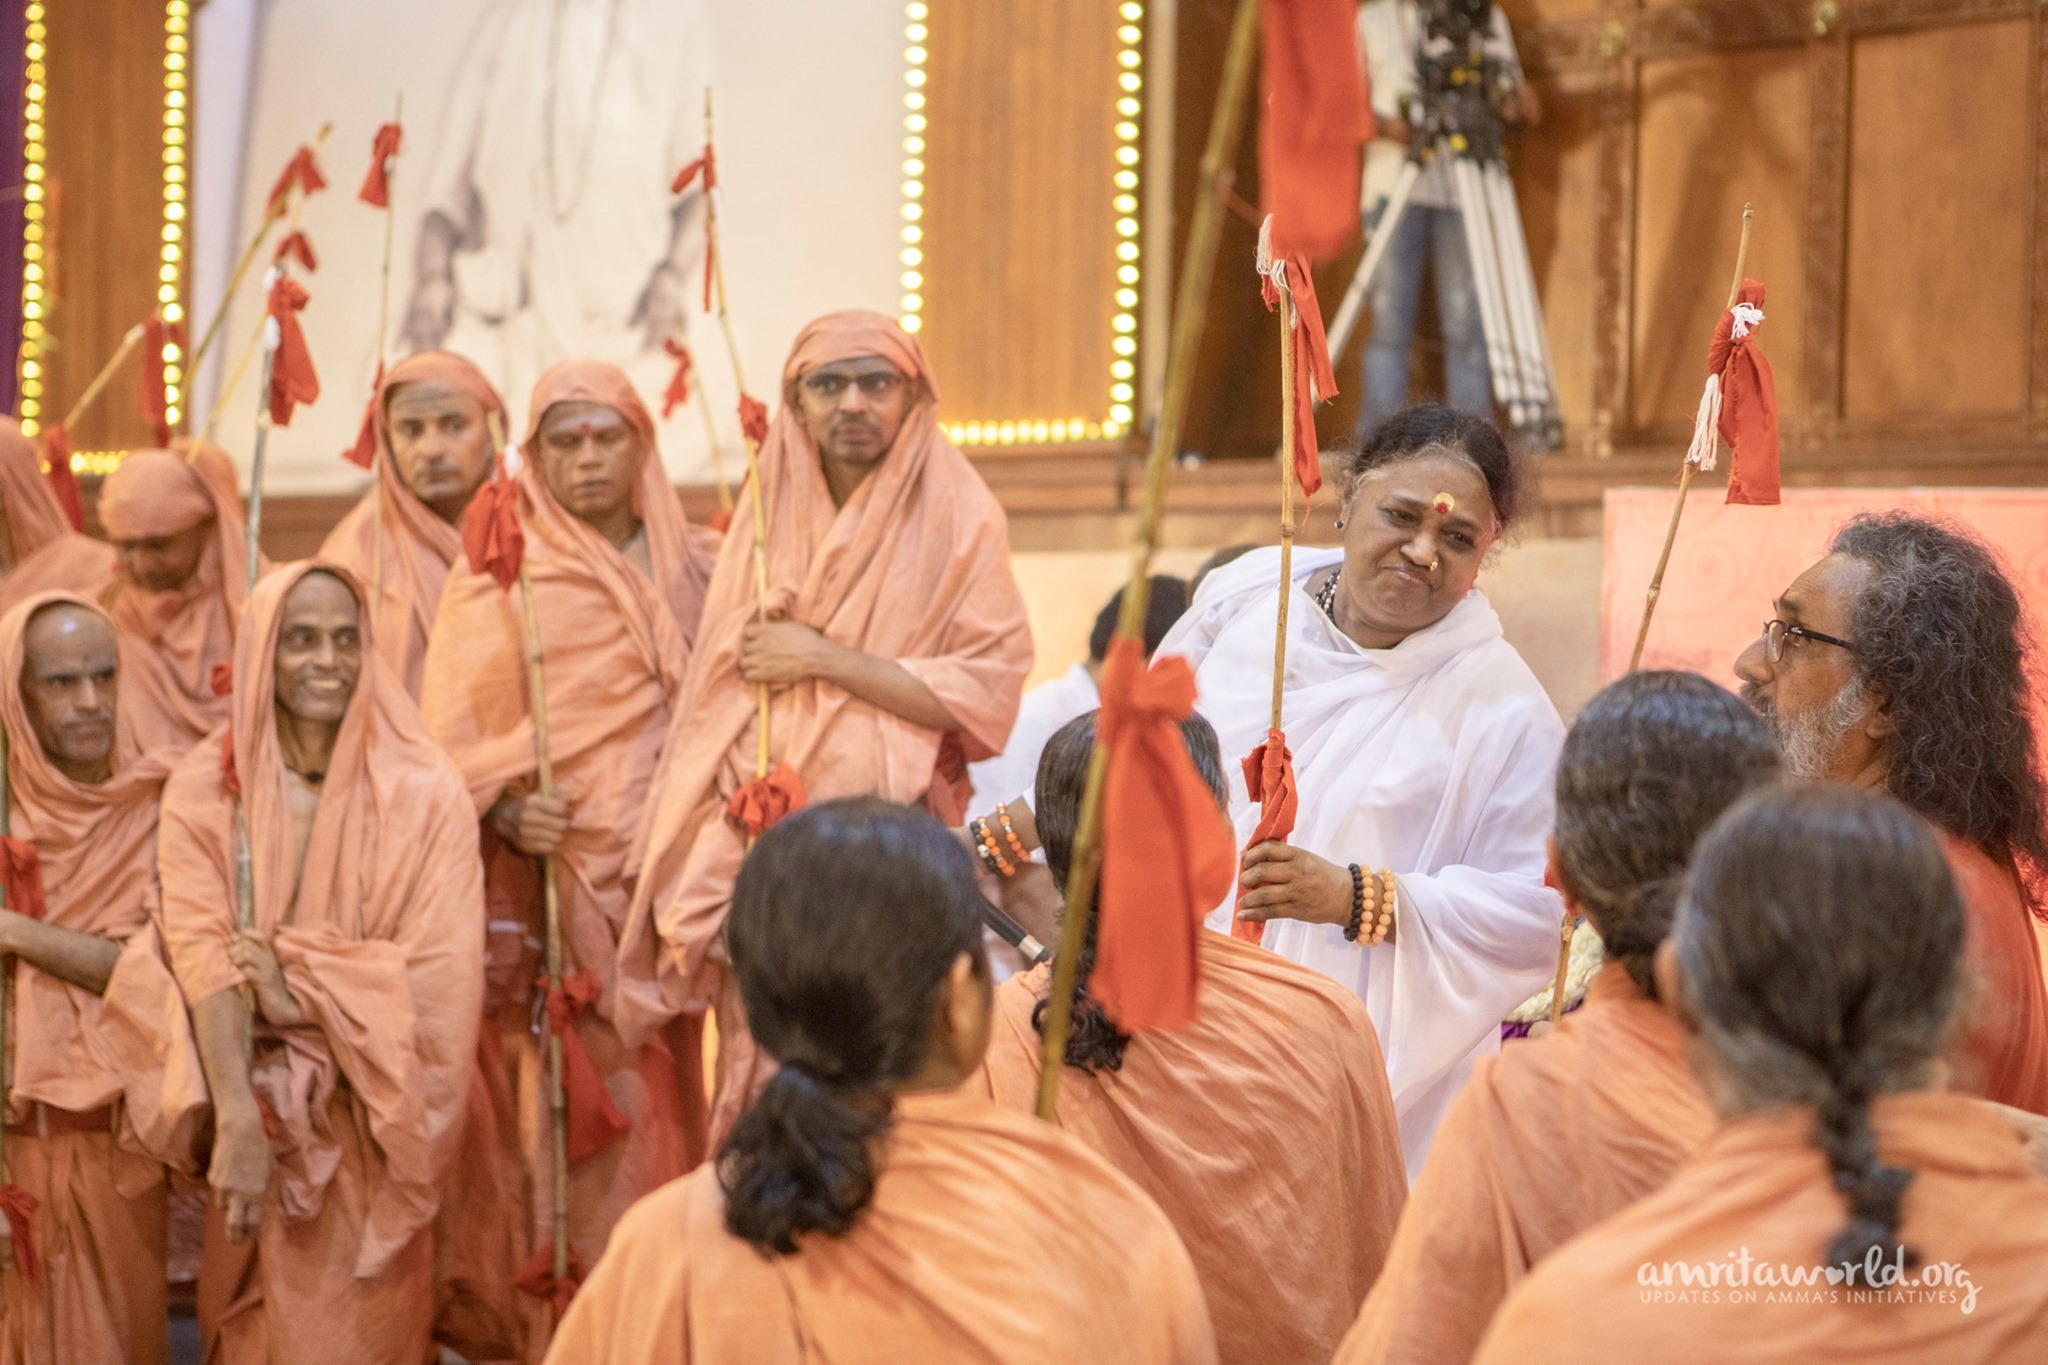 Amma, seats on her peetcham as she oversees the Sannyasa and Brahmacharya Initiation